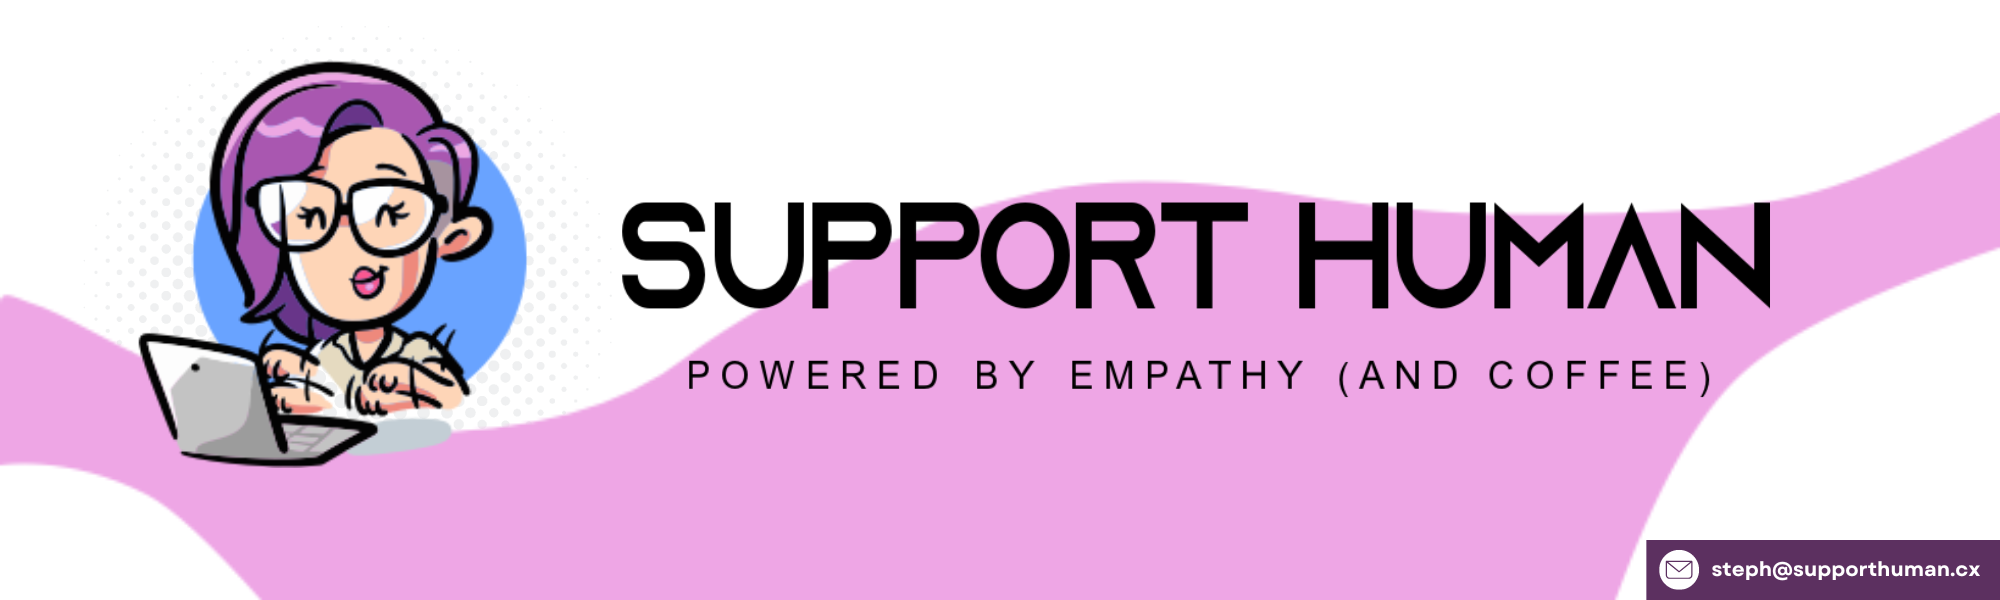 Support Human